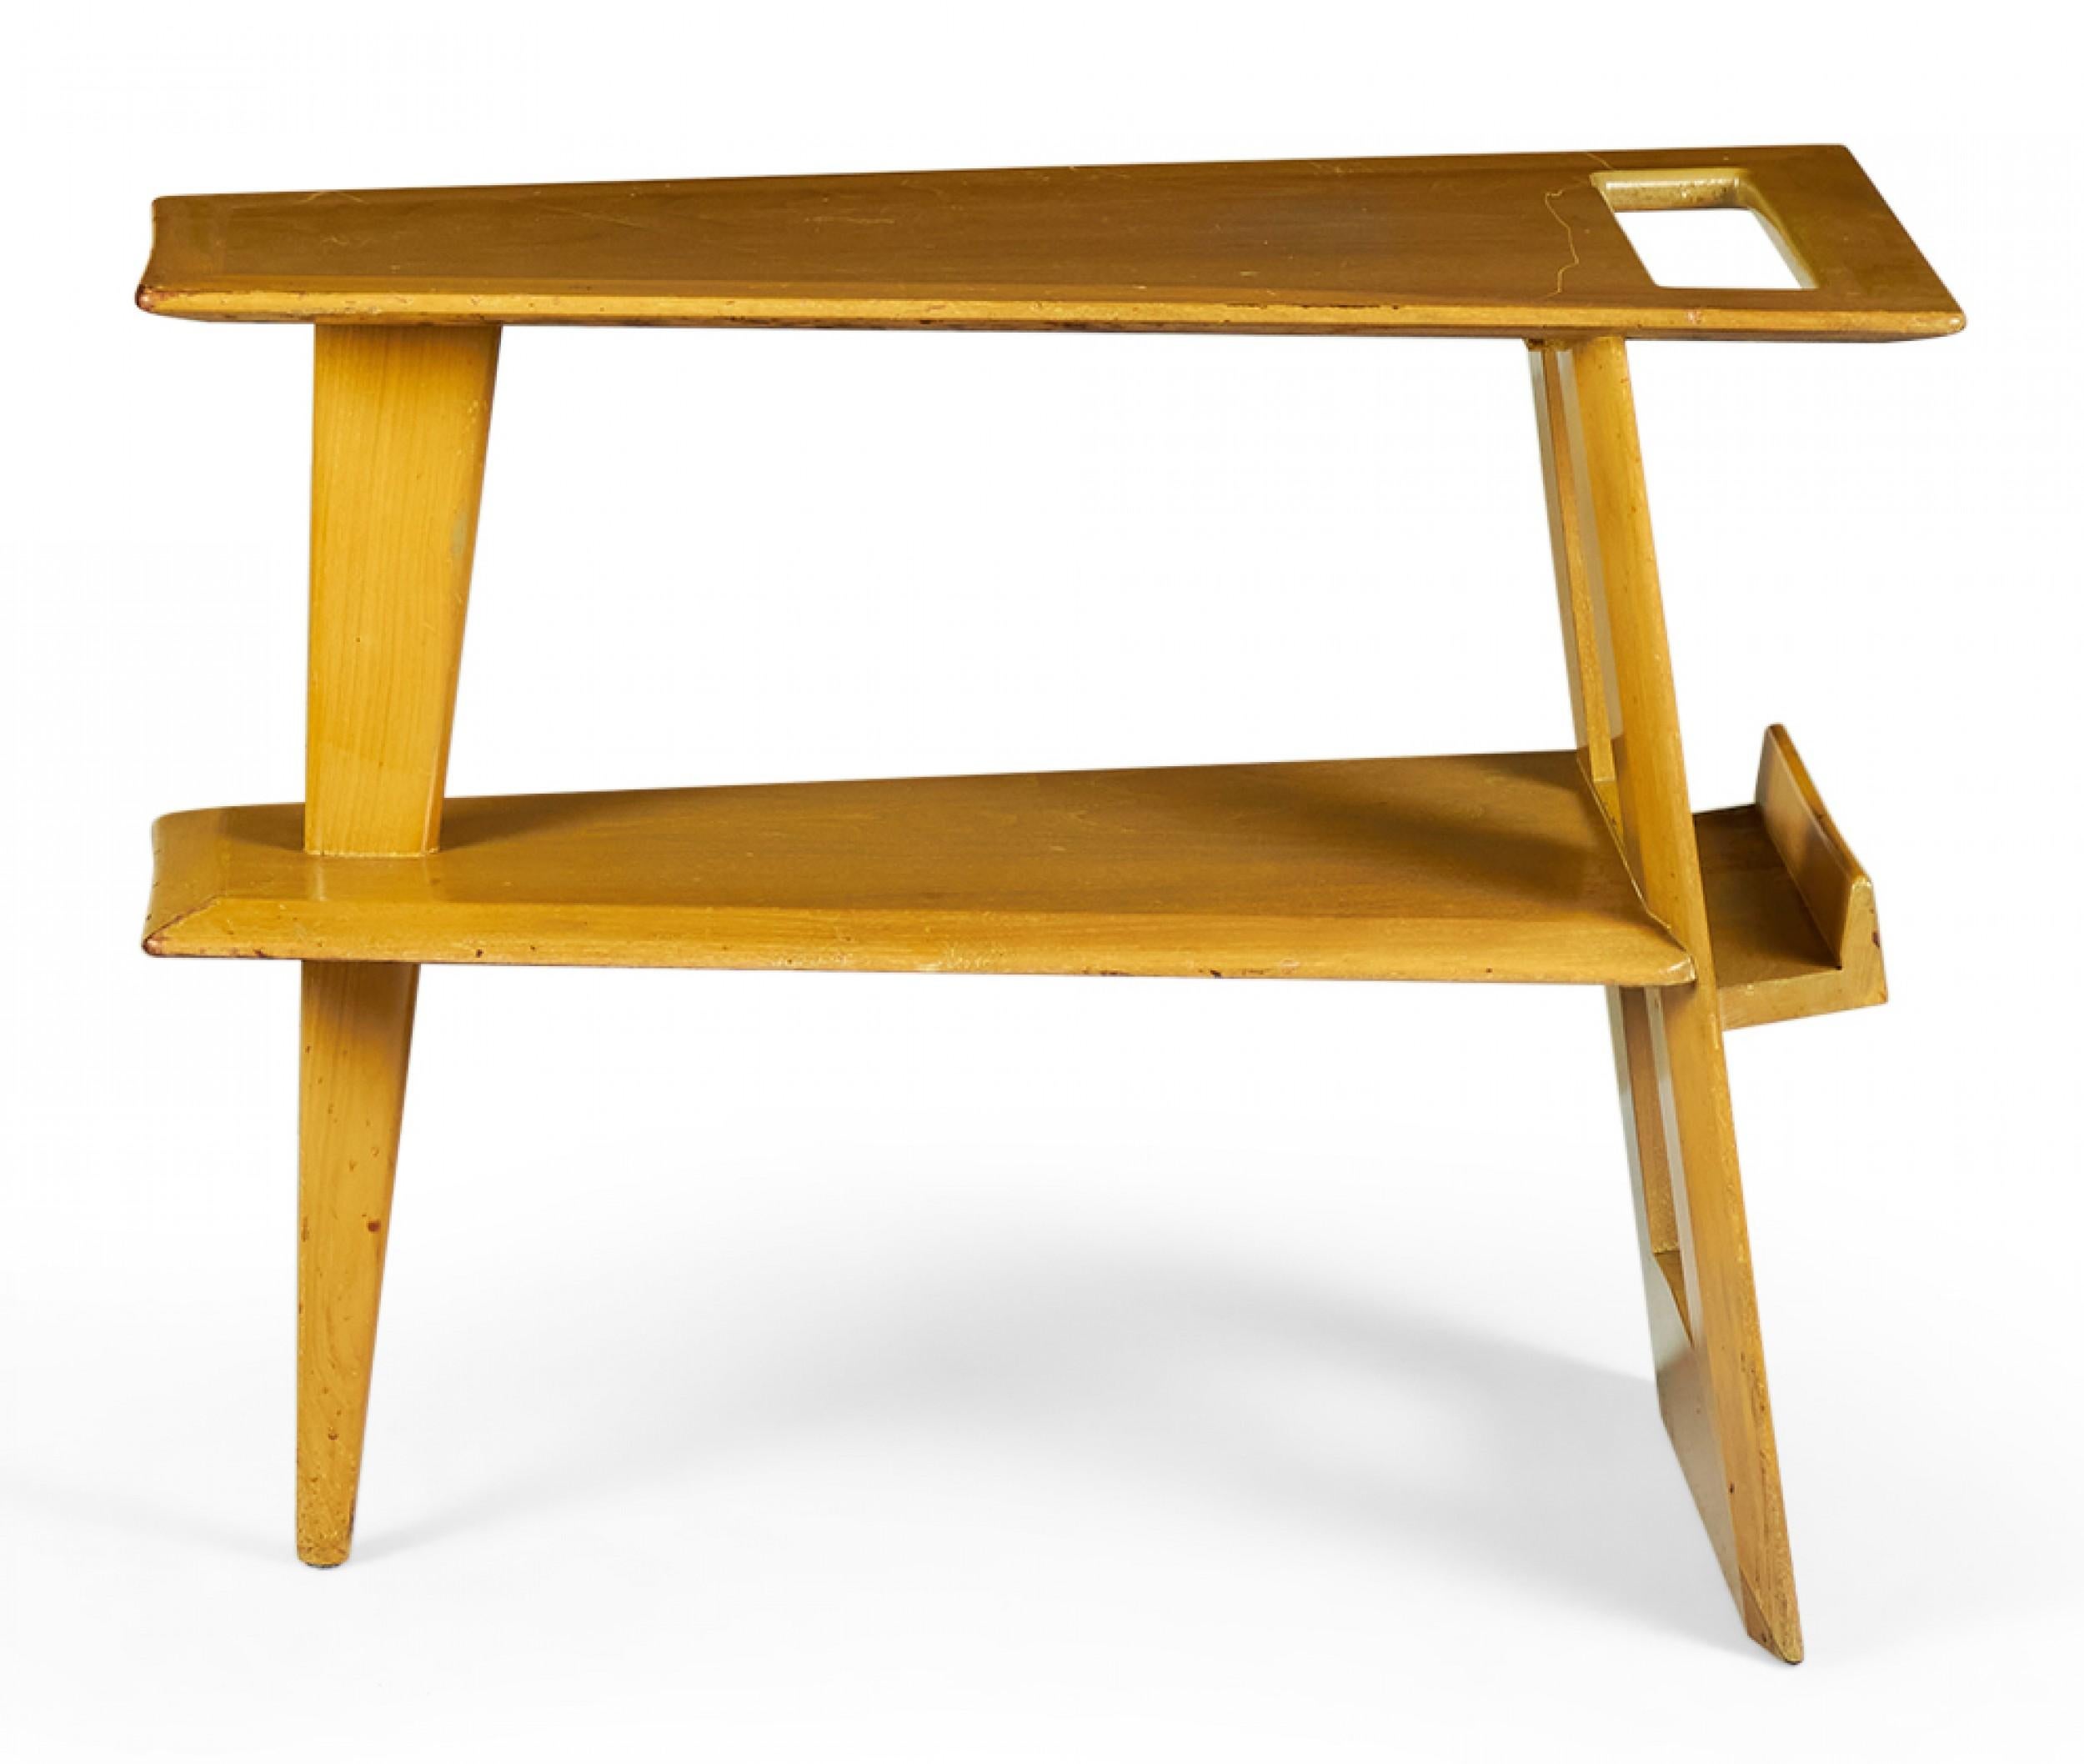 Danish Mid-Century Blond Mahogany Wedge Magazine Table 'Manner of Jens Risom' In Good Condition For Sale In New York, NY